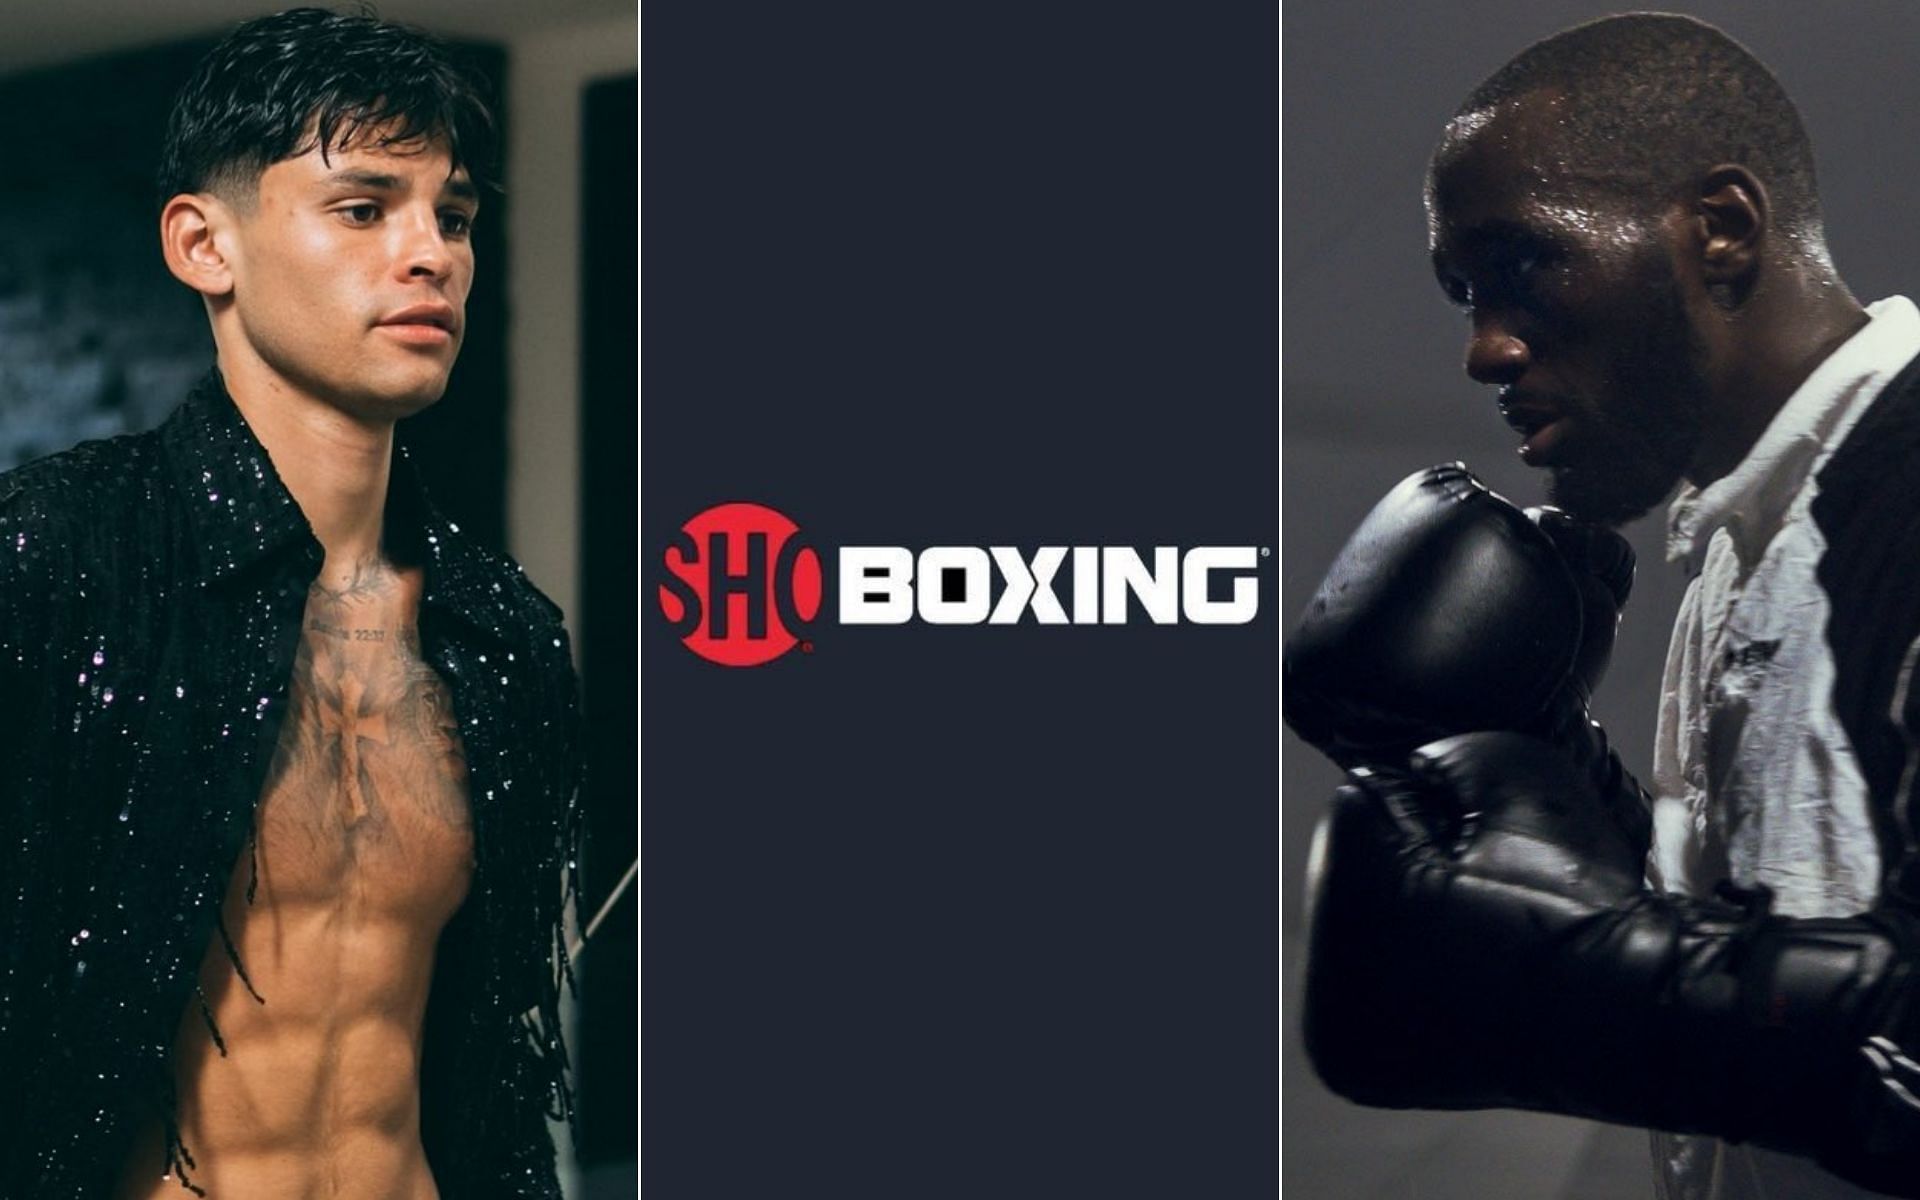 Ryan Garcia [Left], Showtime Boxing logo [Middle], and Terence Crawford [Right] [Photo credit: @RyanGarcia, @ShowtimeBoxing, and @terencecrawford - X]